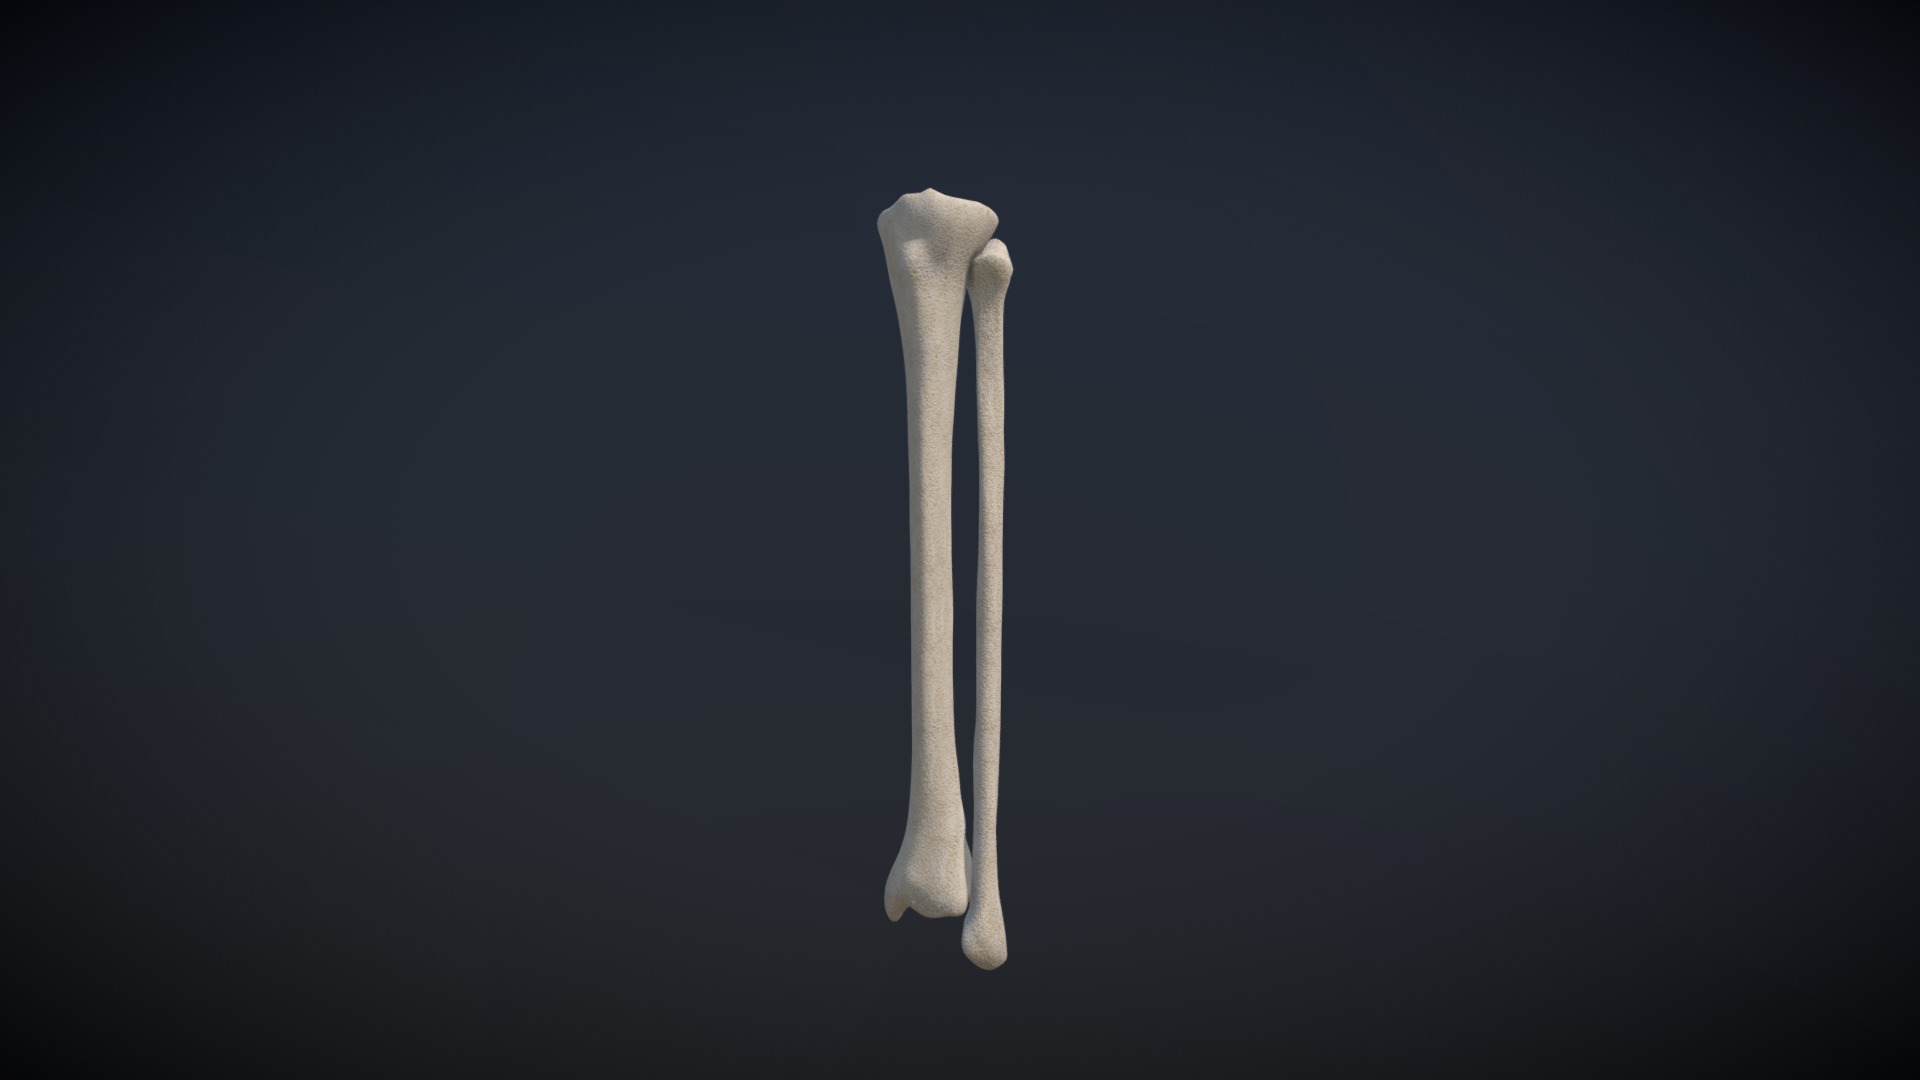 3D model Tibia and Fibula / Tibia Y Peroné - This is a 3D model of the Tibia and Fibula / Tibia Y Peroné. The 3D model is about a white bone on a black background.